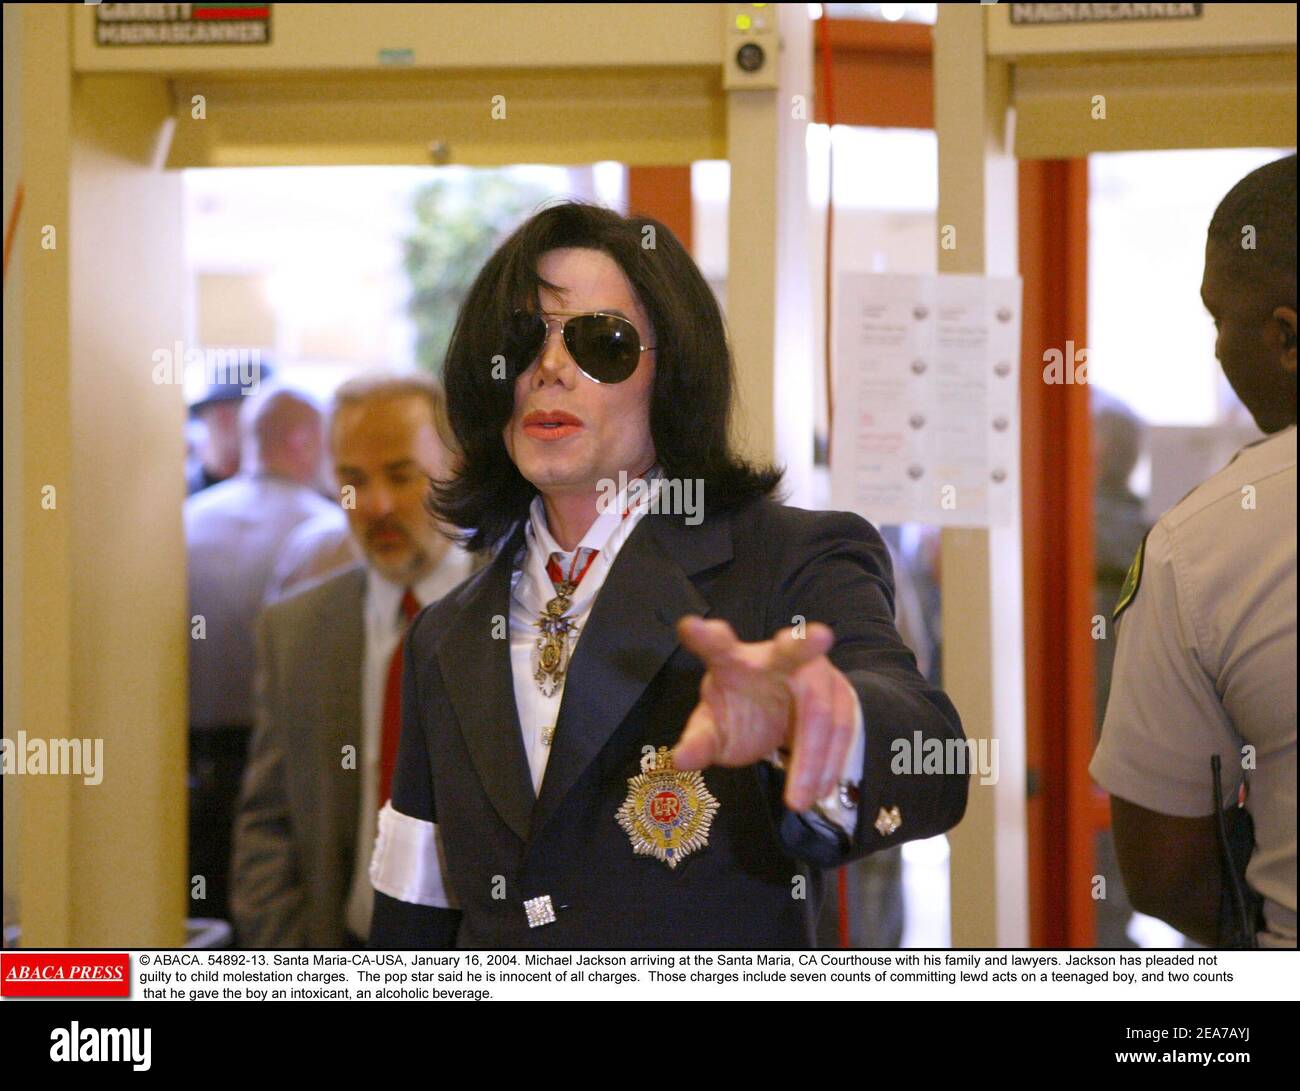 © ABACA. 54892-13. Santa Maria-CA-USA, January 16, 2004. Michael Jackson arriving at the Santa Maria, CA Courthouse with his family and lawyers. Jackson has pleaded not guilty to child molestation charges. The pop star said he is innocent of all charges. Those charges include seven counts of committing lewd acts on a teenaged boy, and two counts that he gave the boy an intoxicant, an alcoholic beverage. Stock Photo